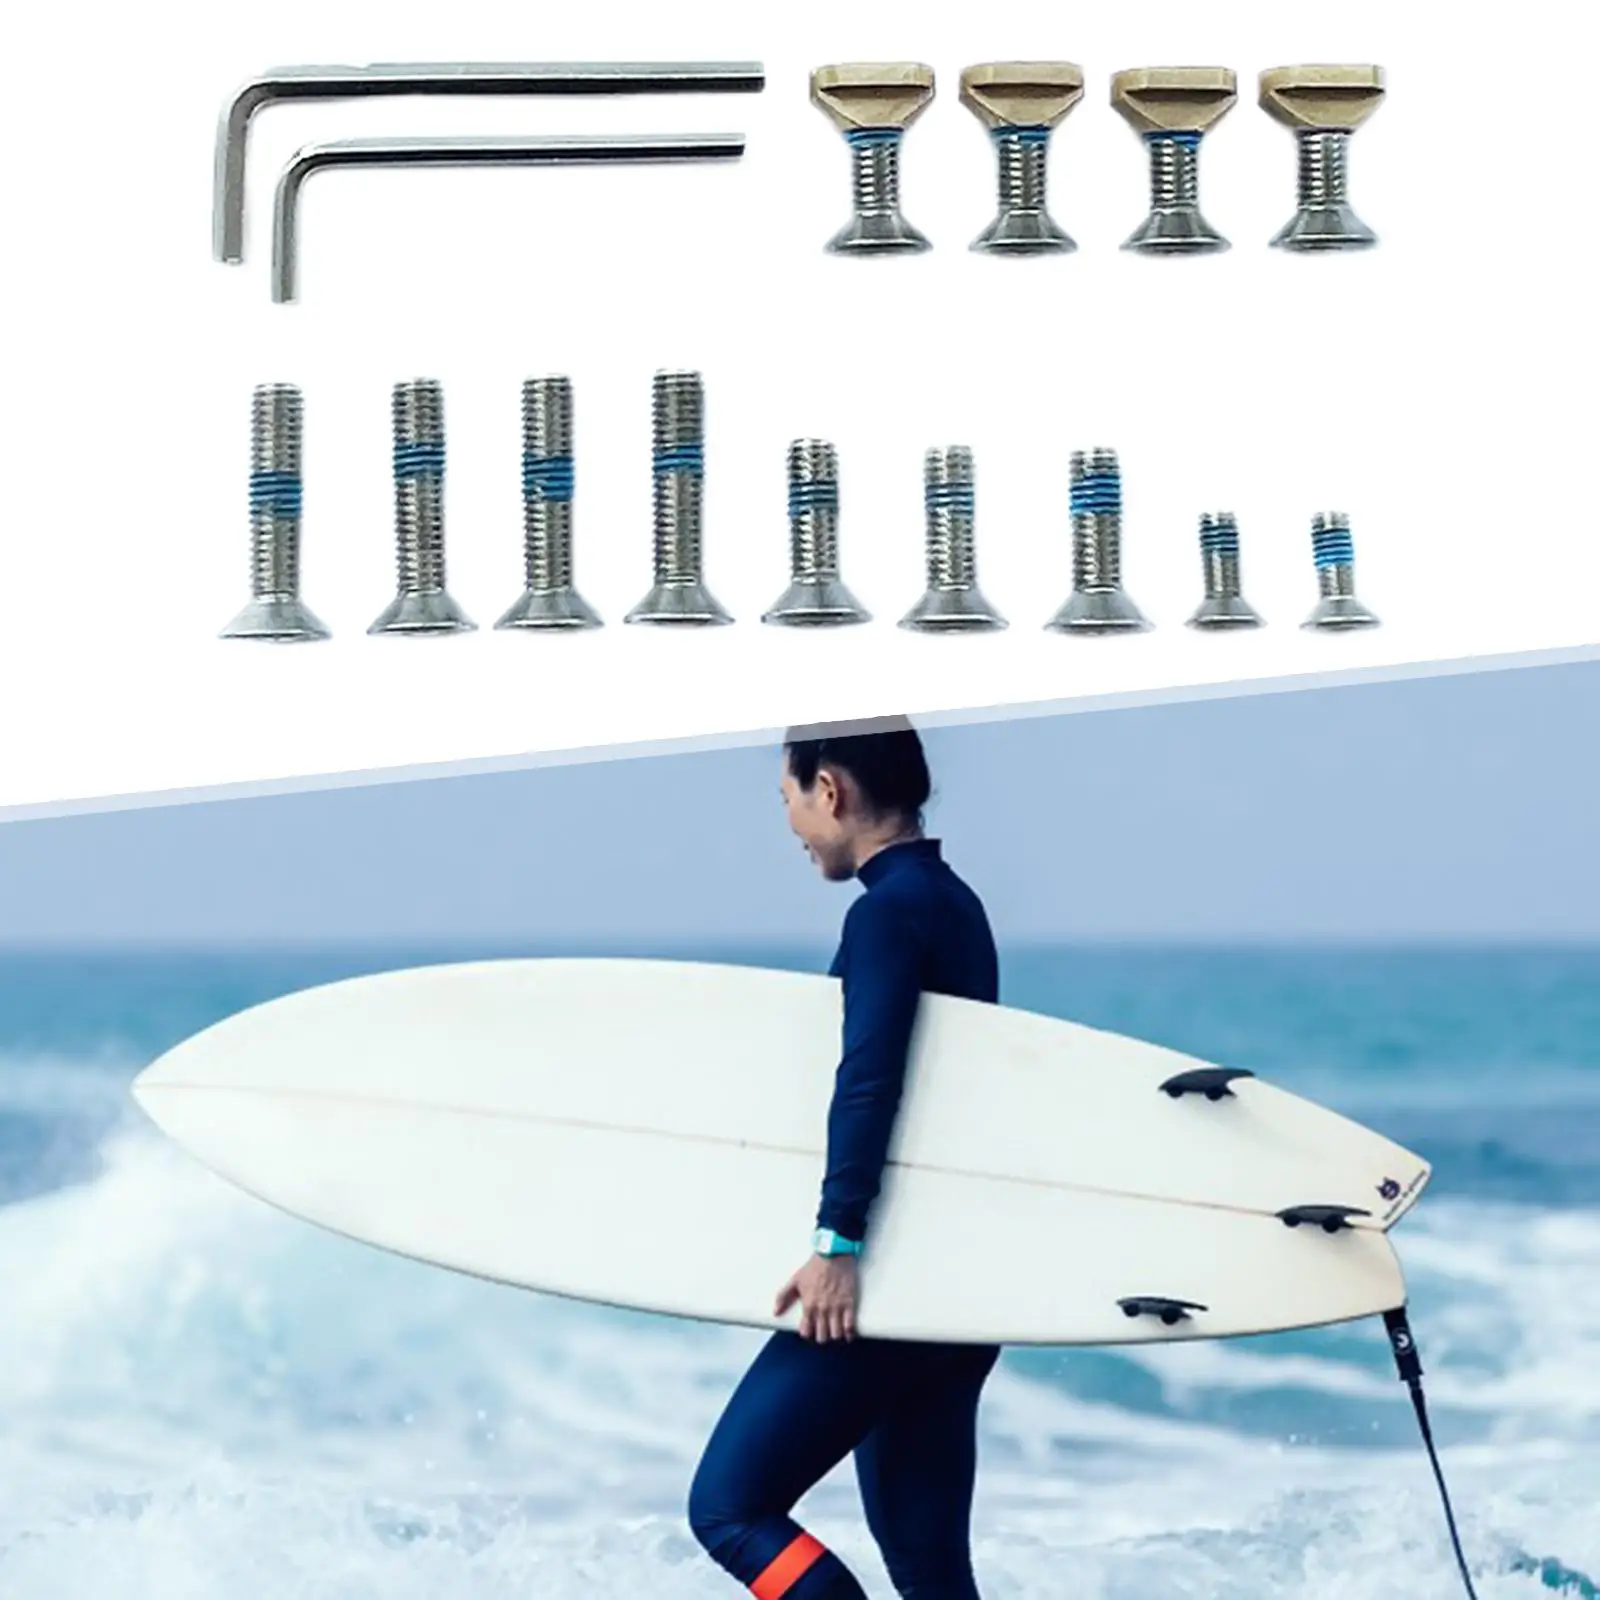 Surfboard Fin Screws Sturdy Easy Installation High Performance Replace Surfing Accessories for Stand Paddle Paddle Board